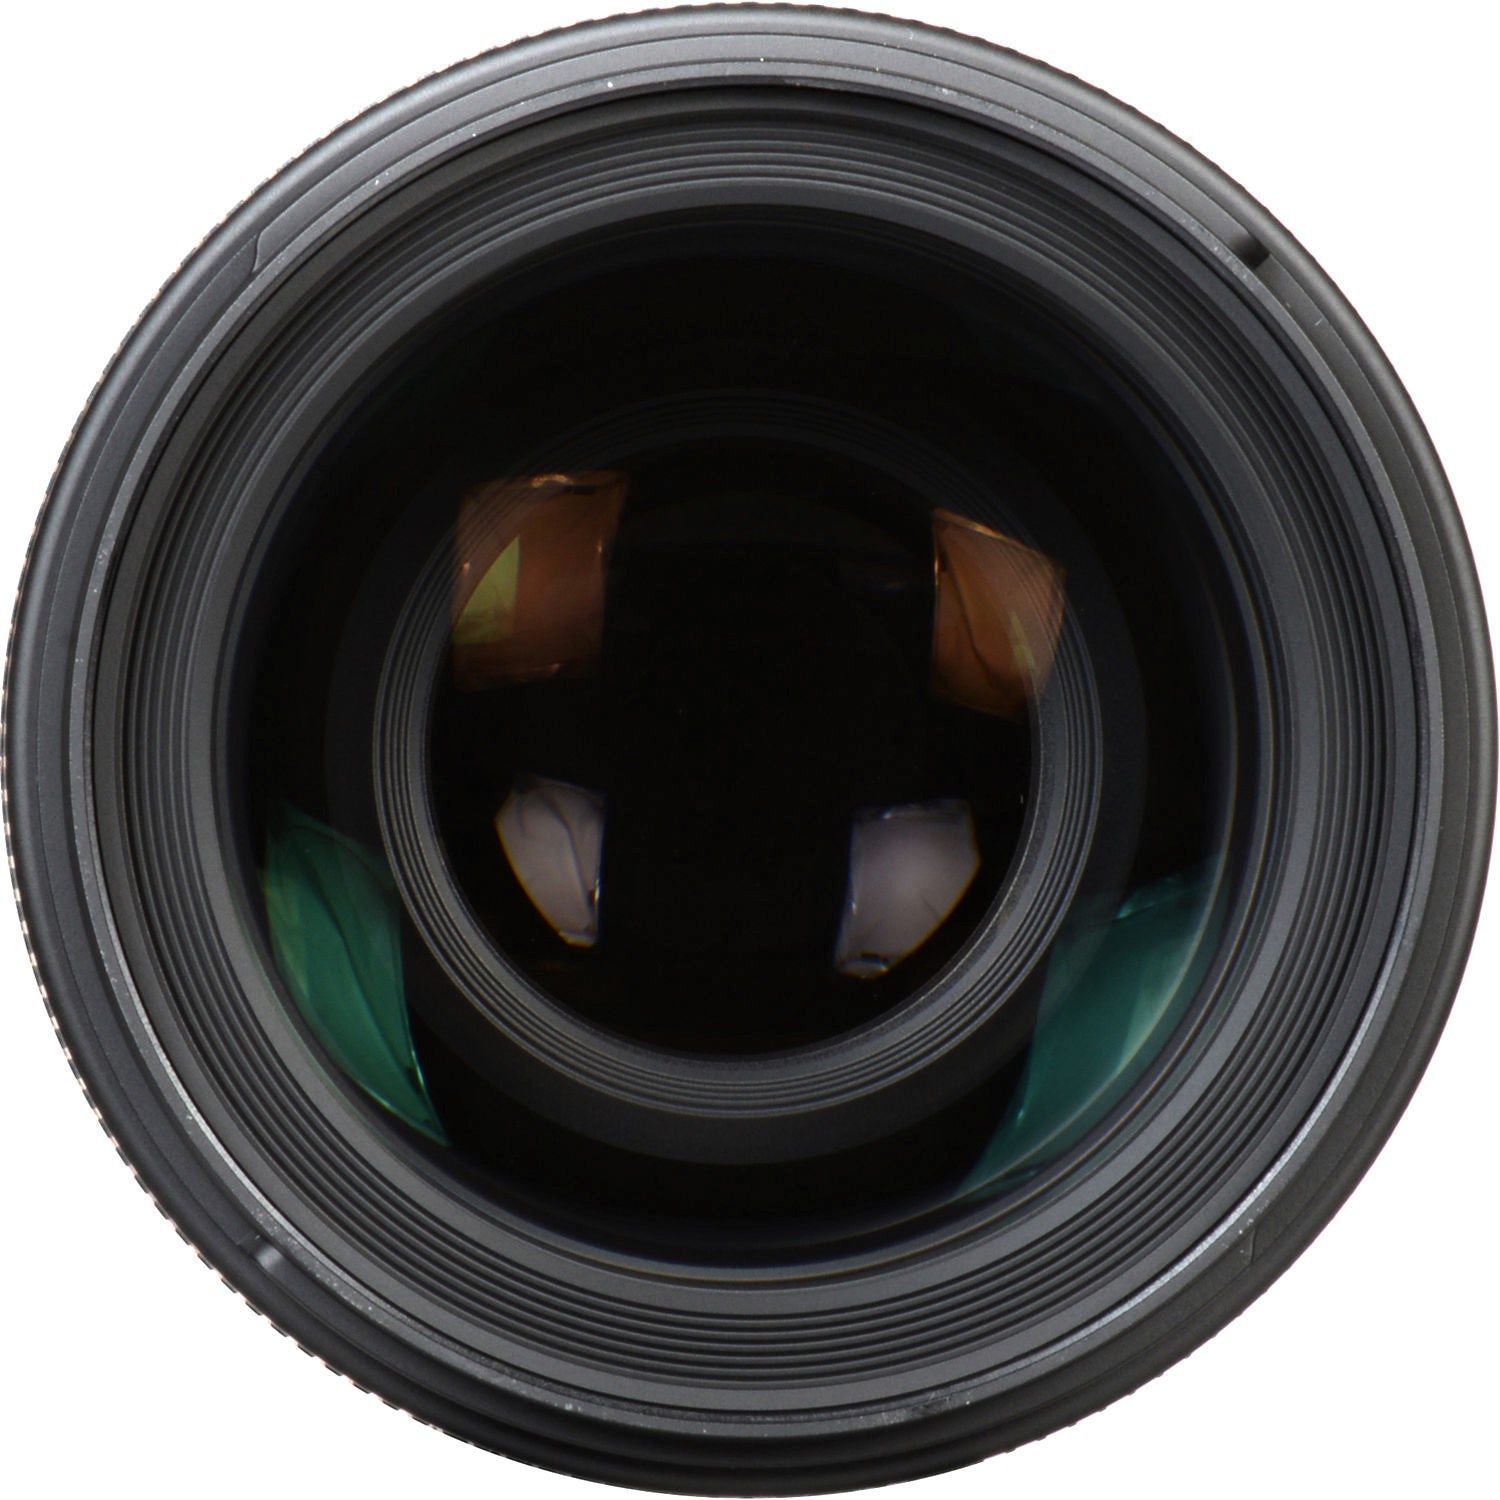 Sigma 50-100mm F1.8 DC HSM Art Lens for Canon EF